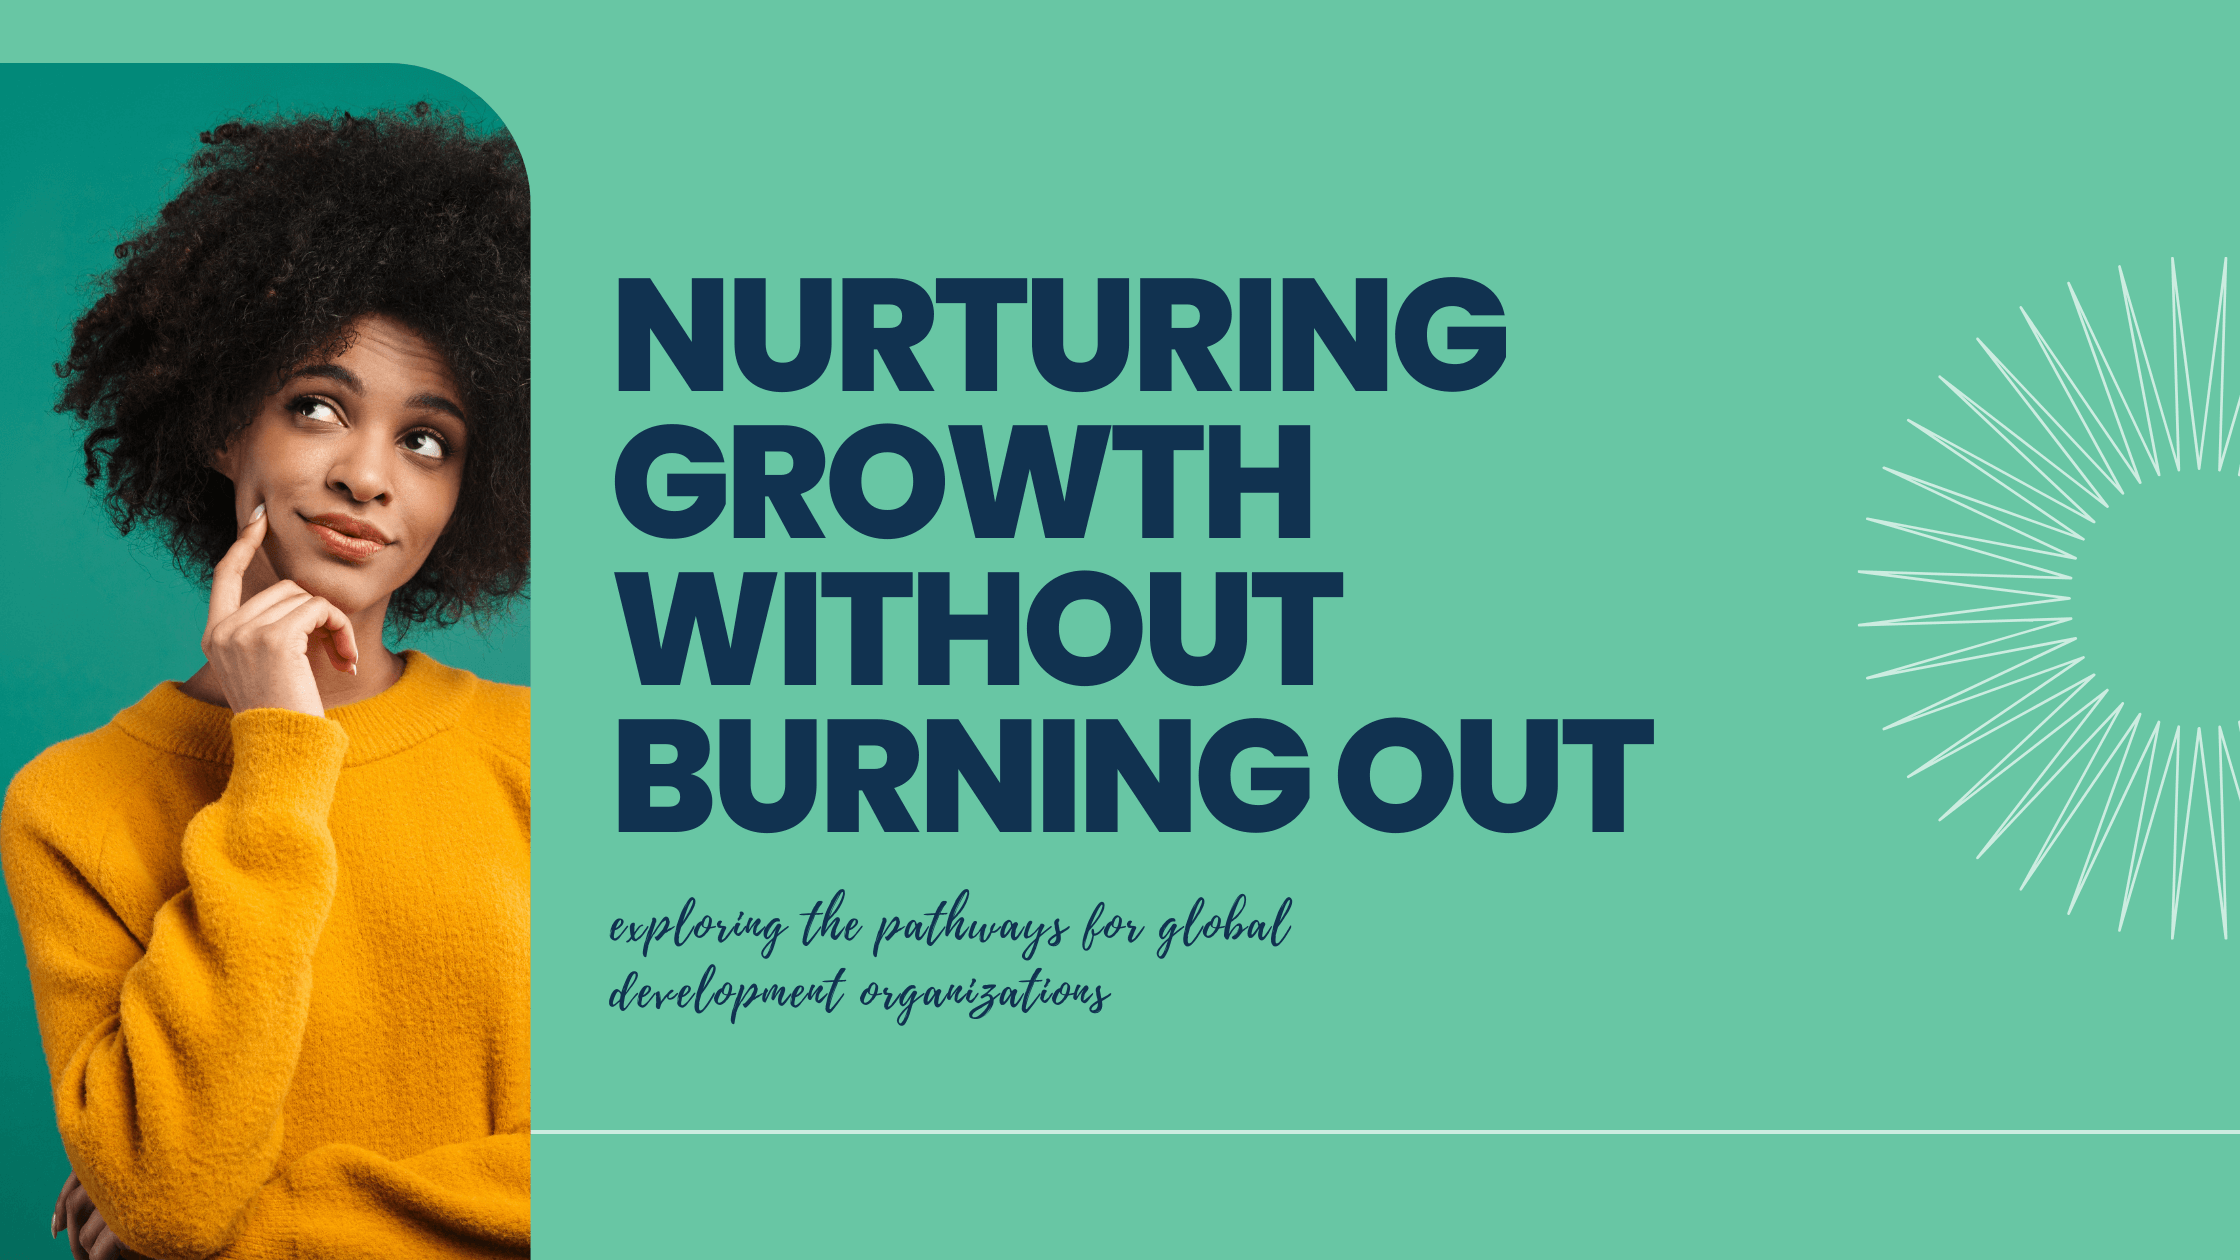 Nurturing Business Development Growth Without Burning Out